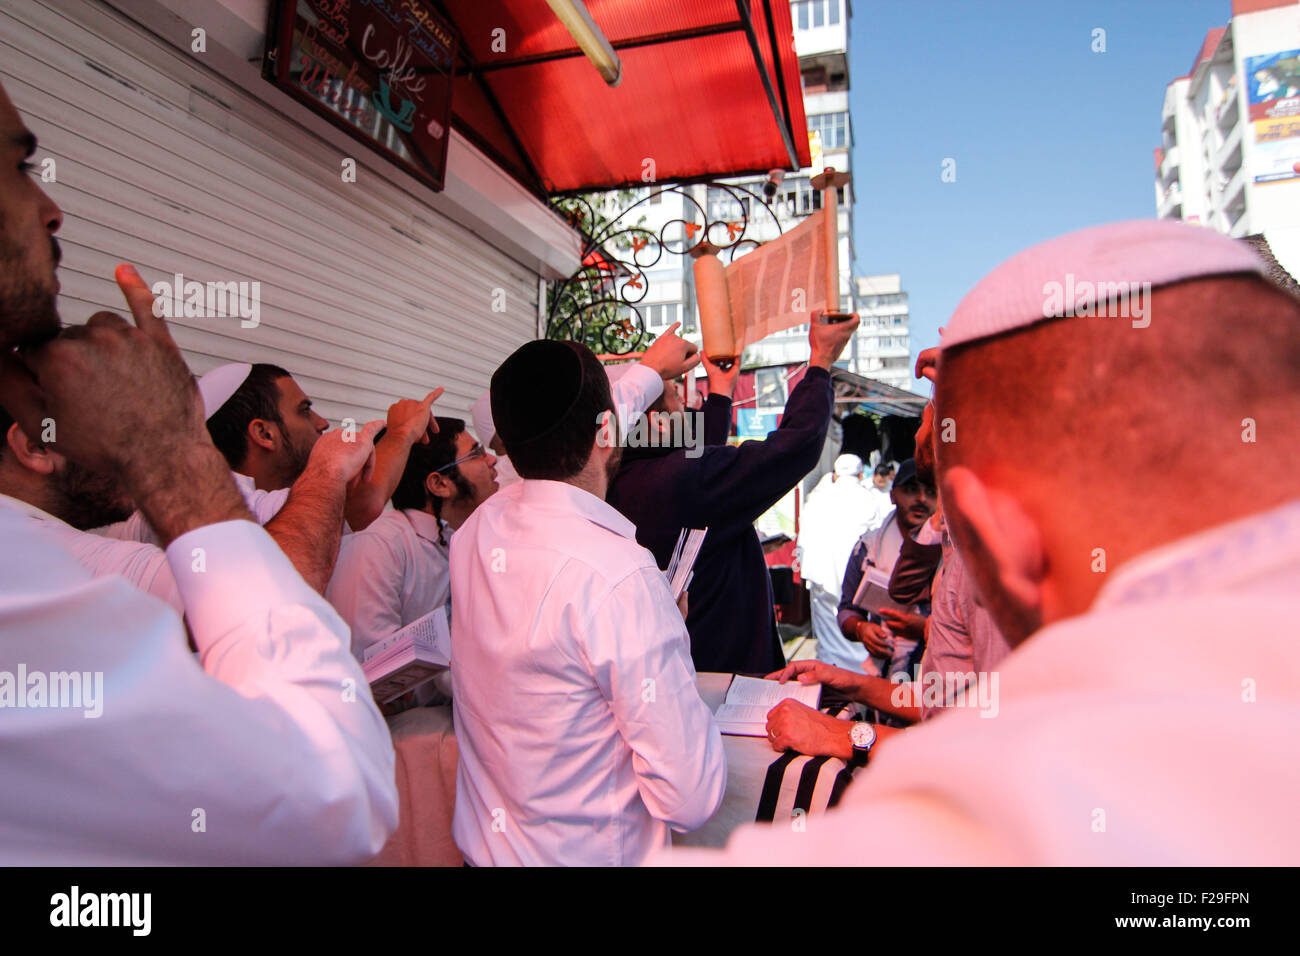 Uman, Ukraine. 13th Sep, 2015. Orthodox Jewish pilgrims hold 'Torah' during during the celebration of Rosh Hashanah in Uman. Every year, thousands of Orthodox Bratslav Hasidic Jews from different countries gather in Uman to mark 'Rosh Hashanah', a Jewish New Year near the tomb of Rabbi Nachman, the great grandson of the founder of Hasidism. © Nazar Furyk/Pacific Press/Alamy Live News Stock Photo